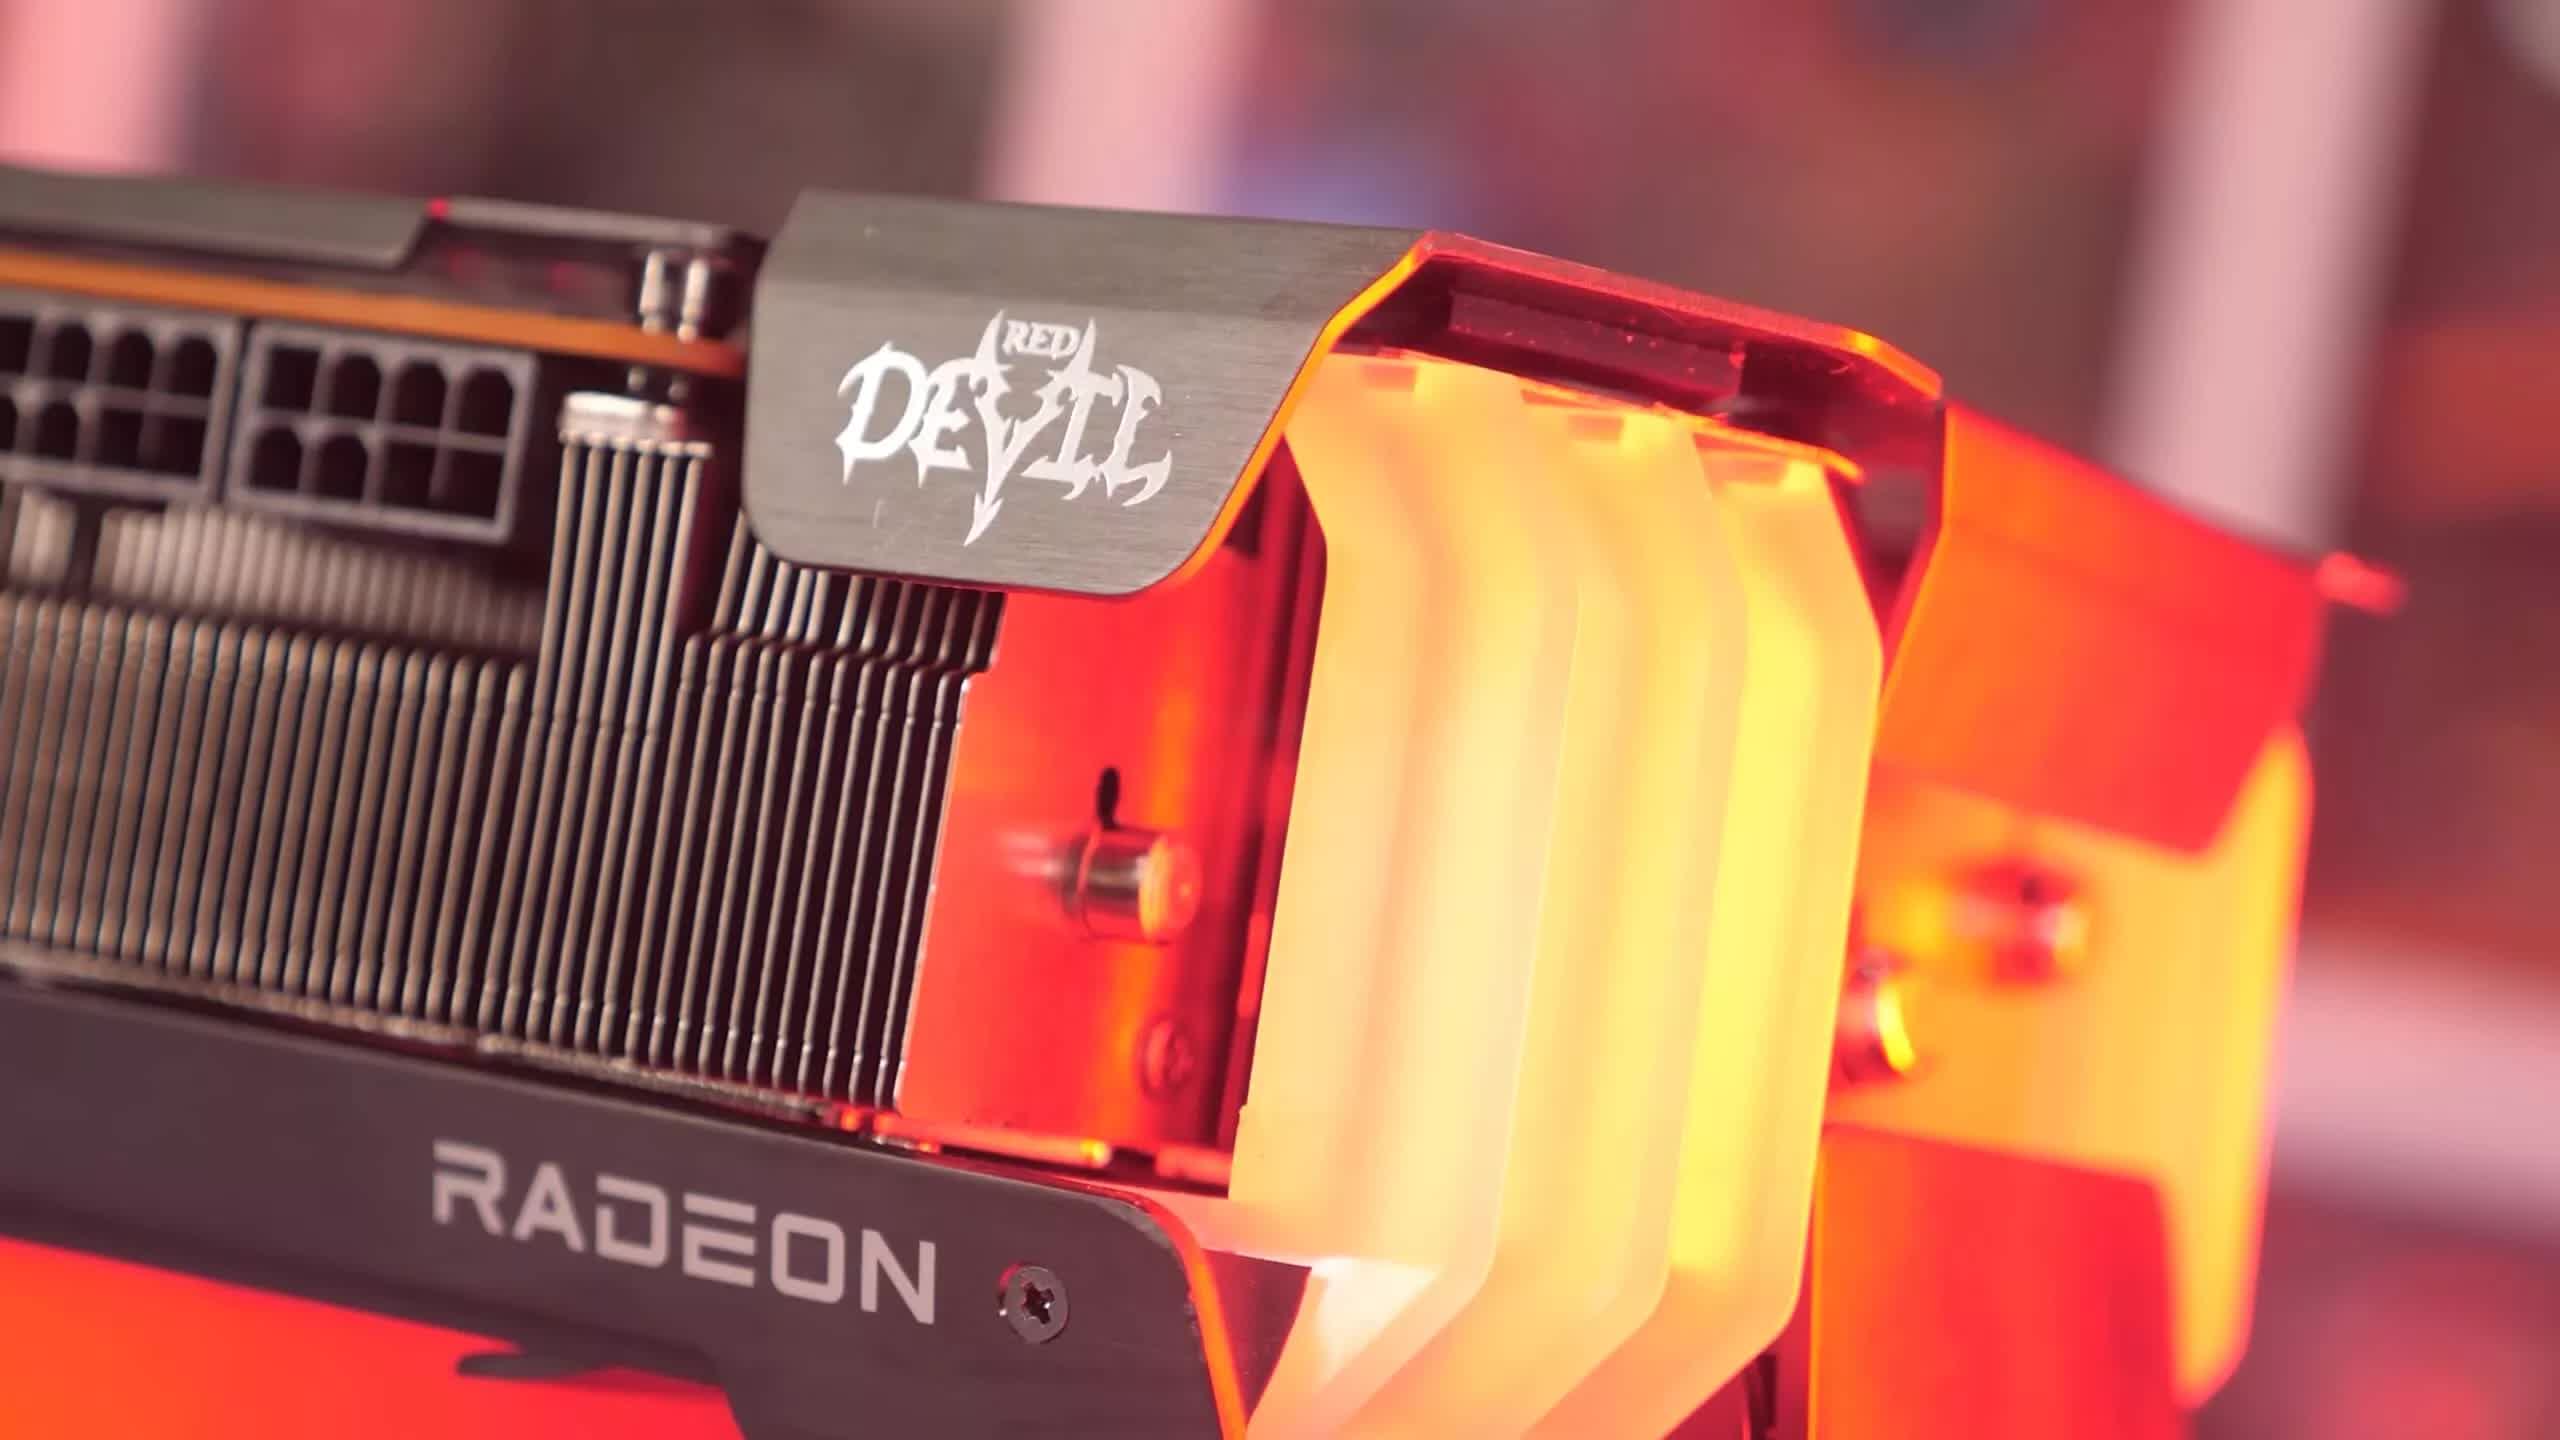 AMD Radeon RX 7000 flagship graphics card will reportedly come with 24 GB of VRAM